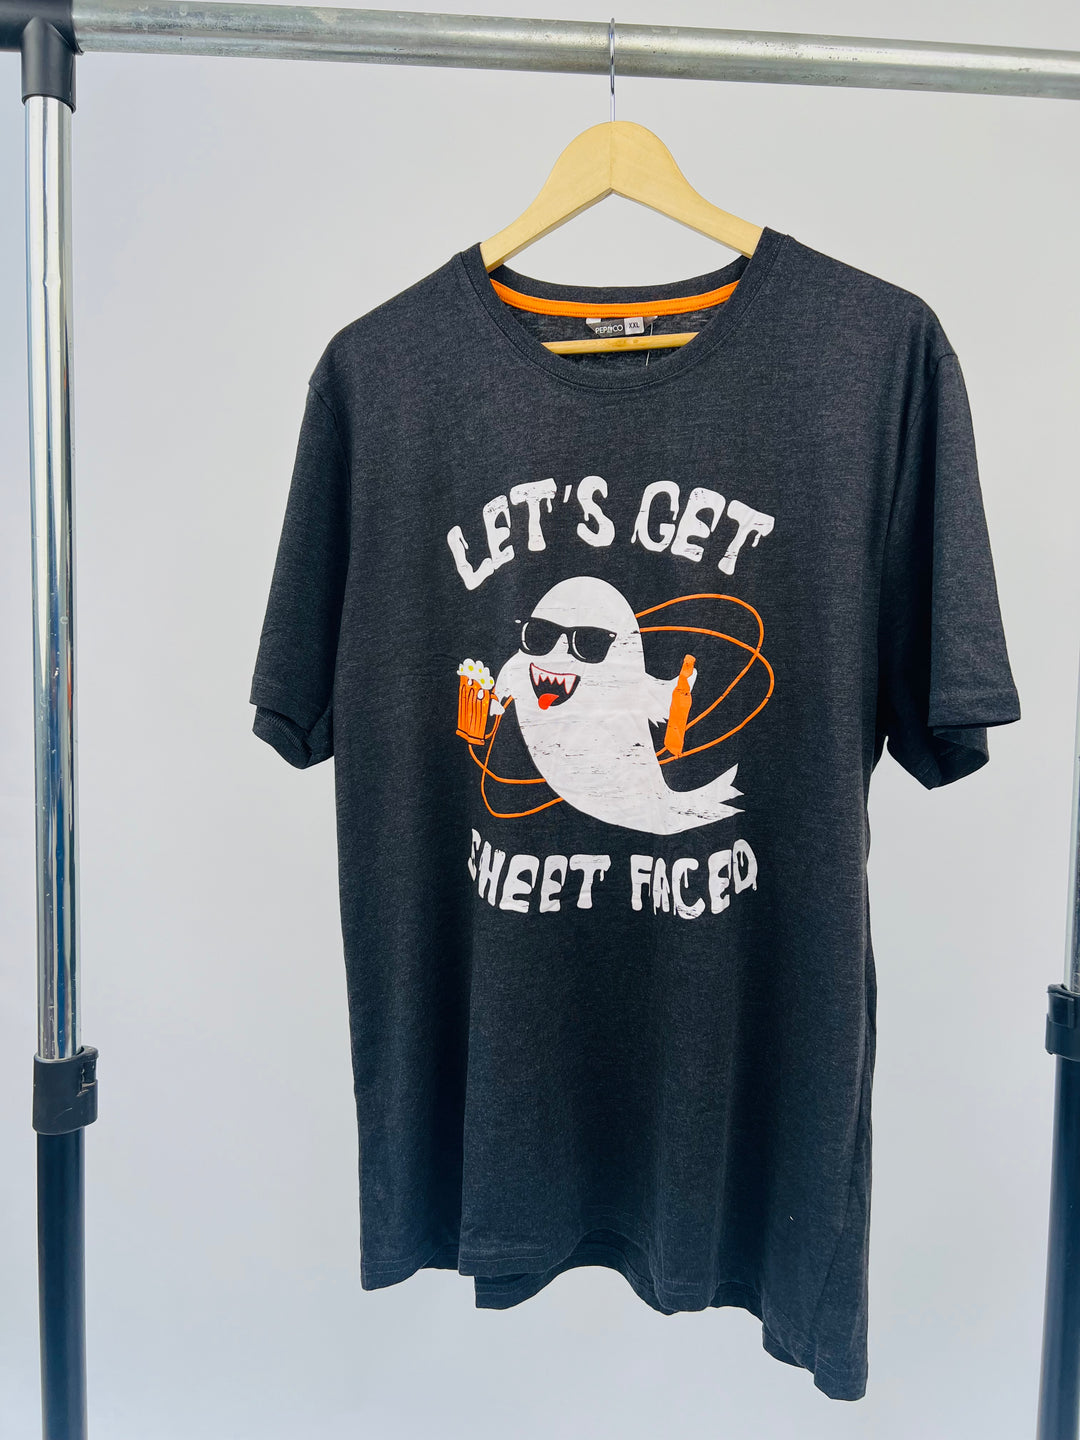 Let’s get shit faced t-shirt